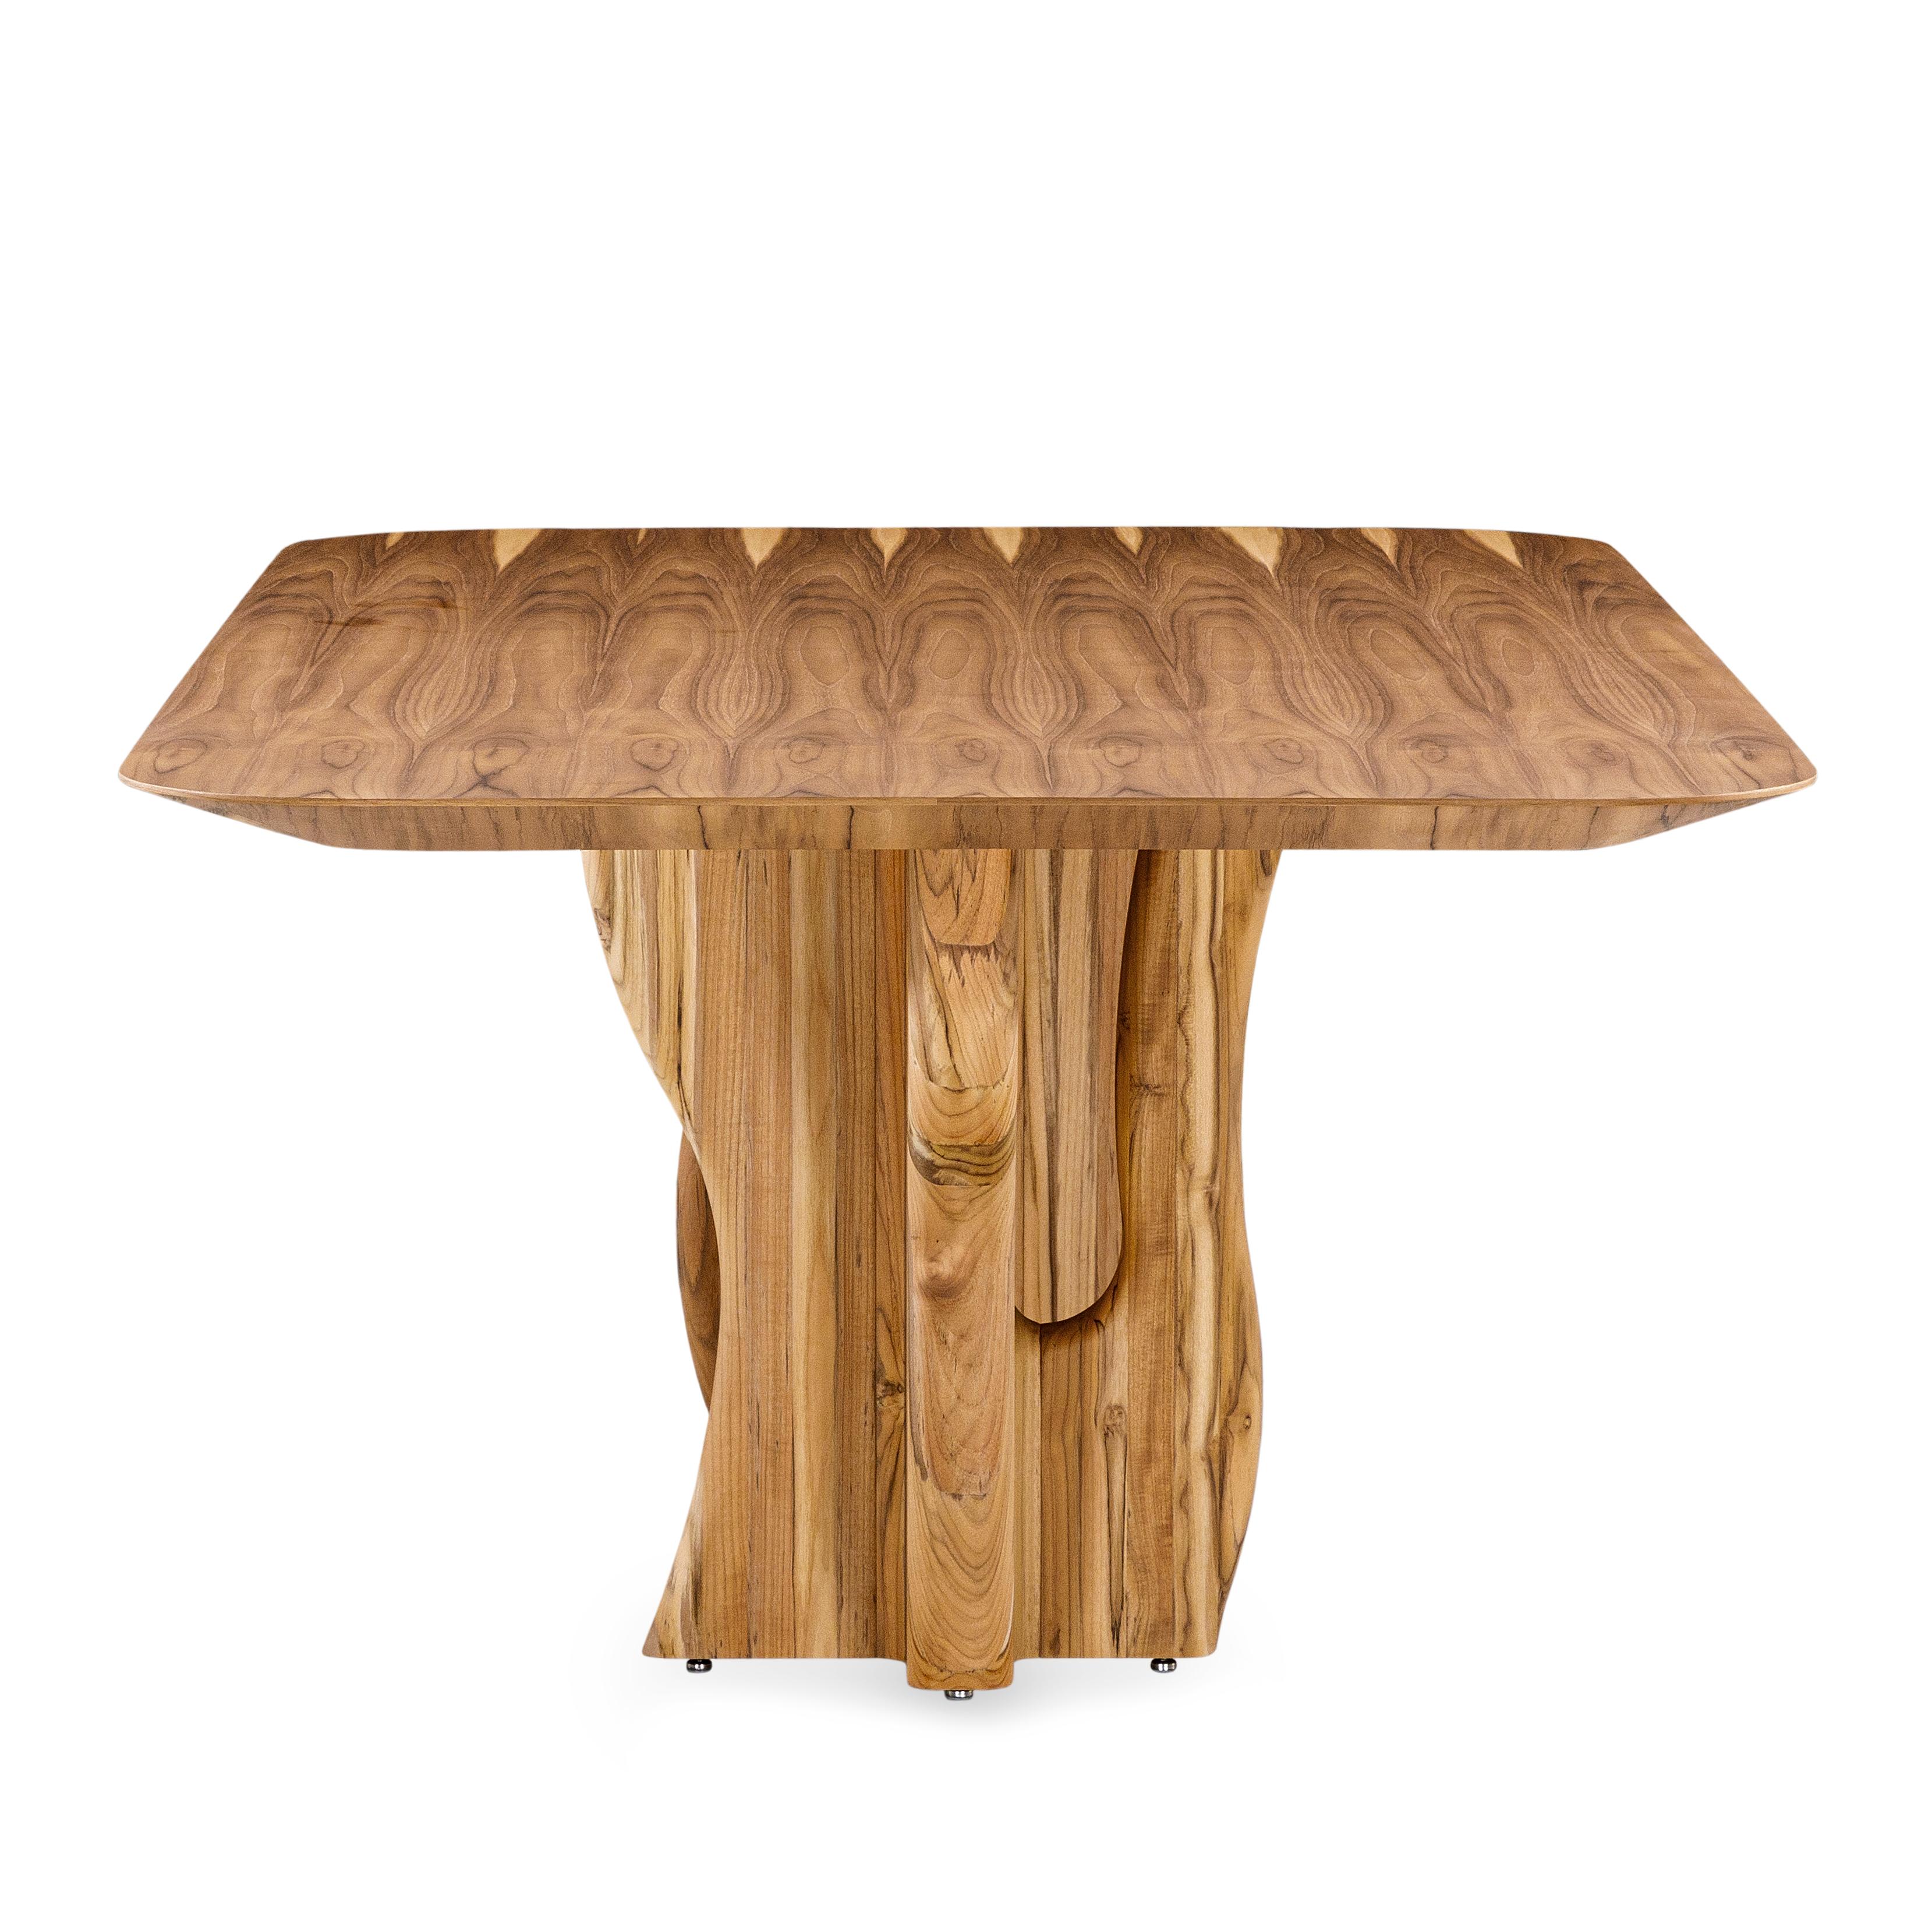 Brazilian Suma Dining Table with Teak Veneered Top and Organic Solid Wood Legs 86'' For Sale